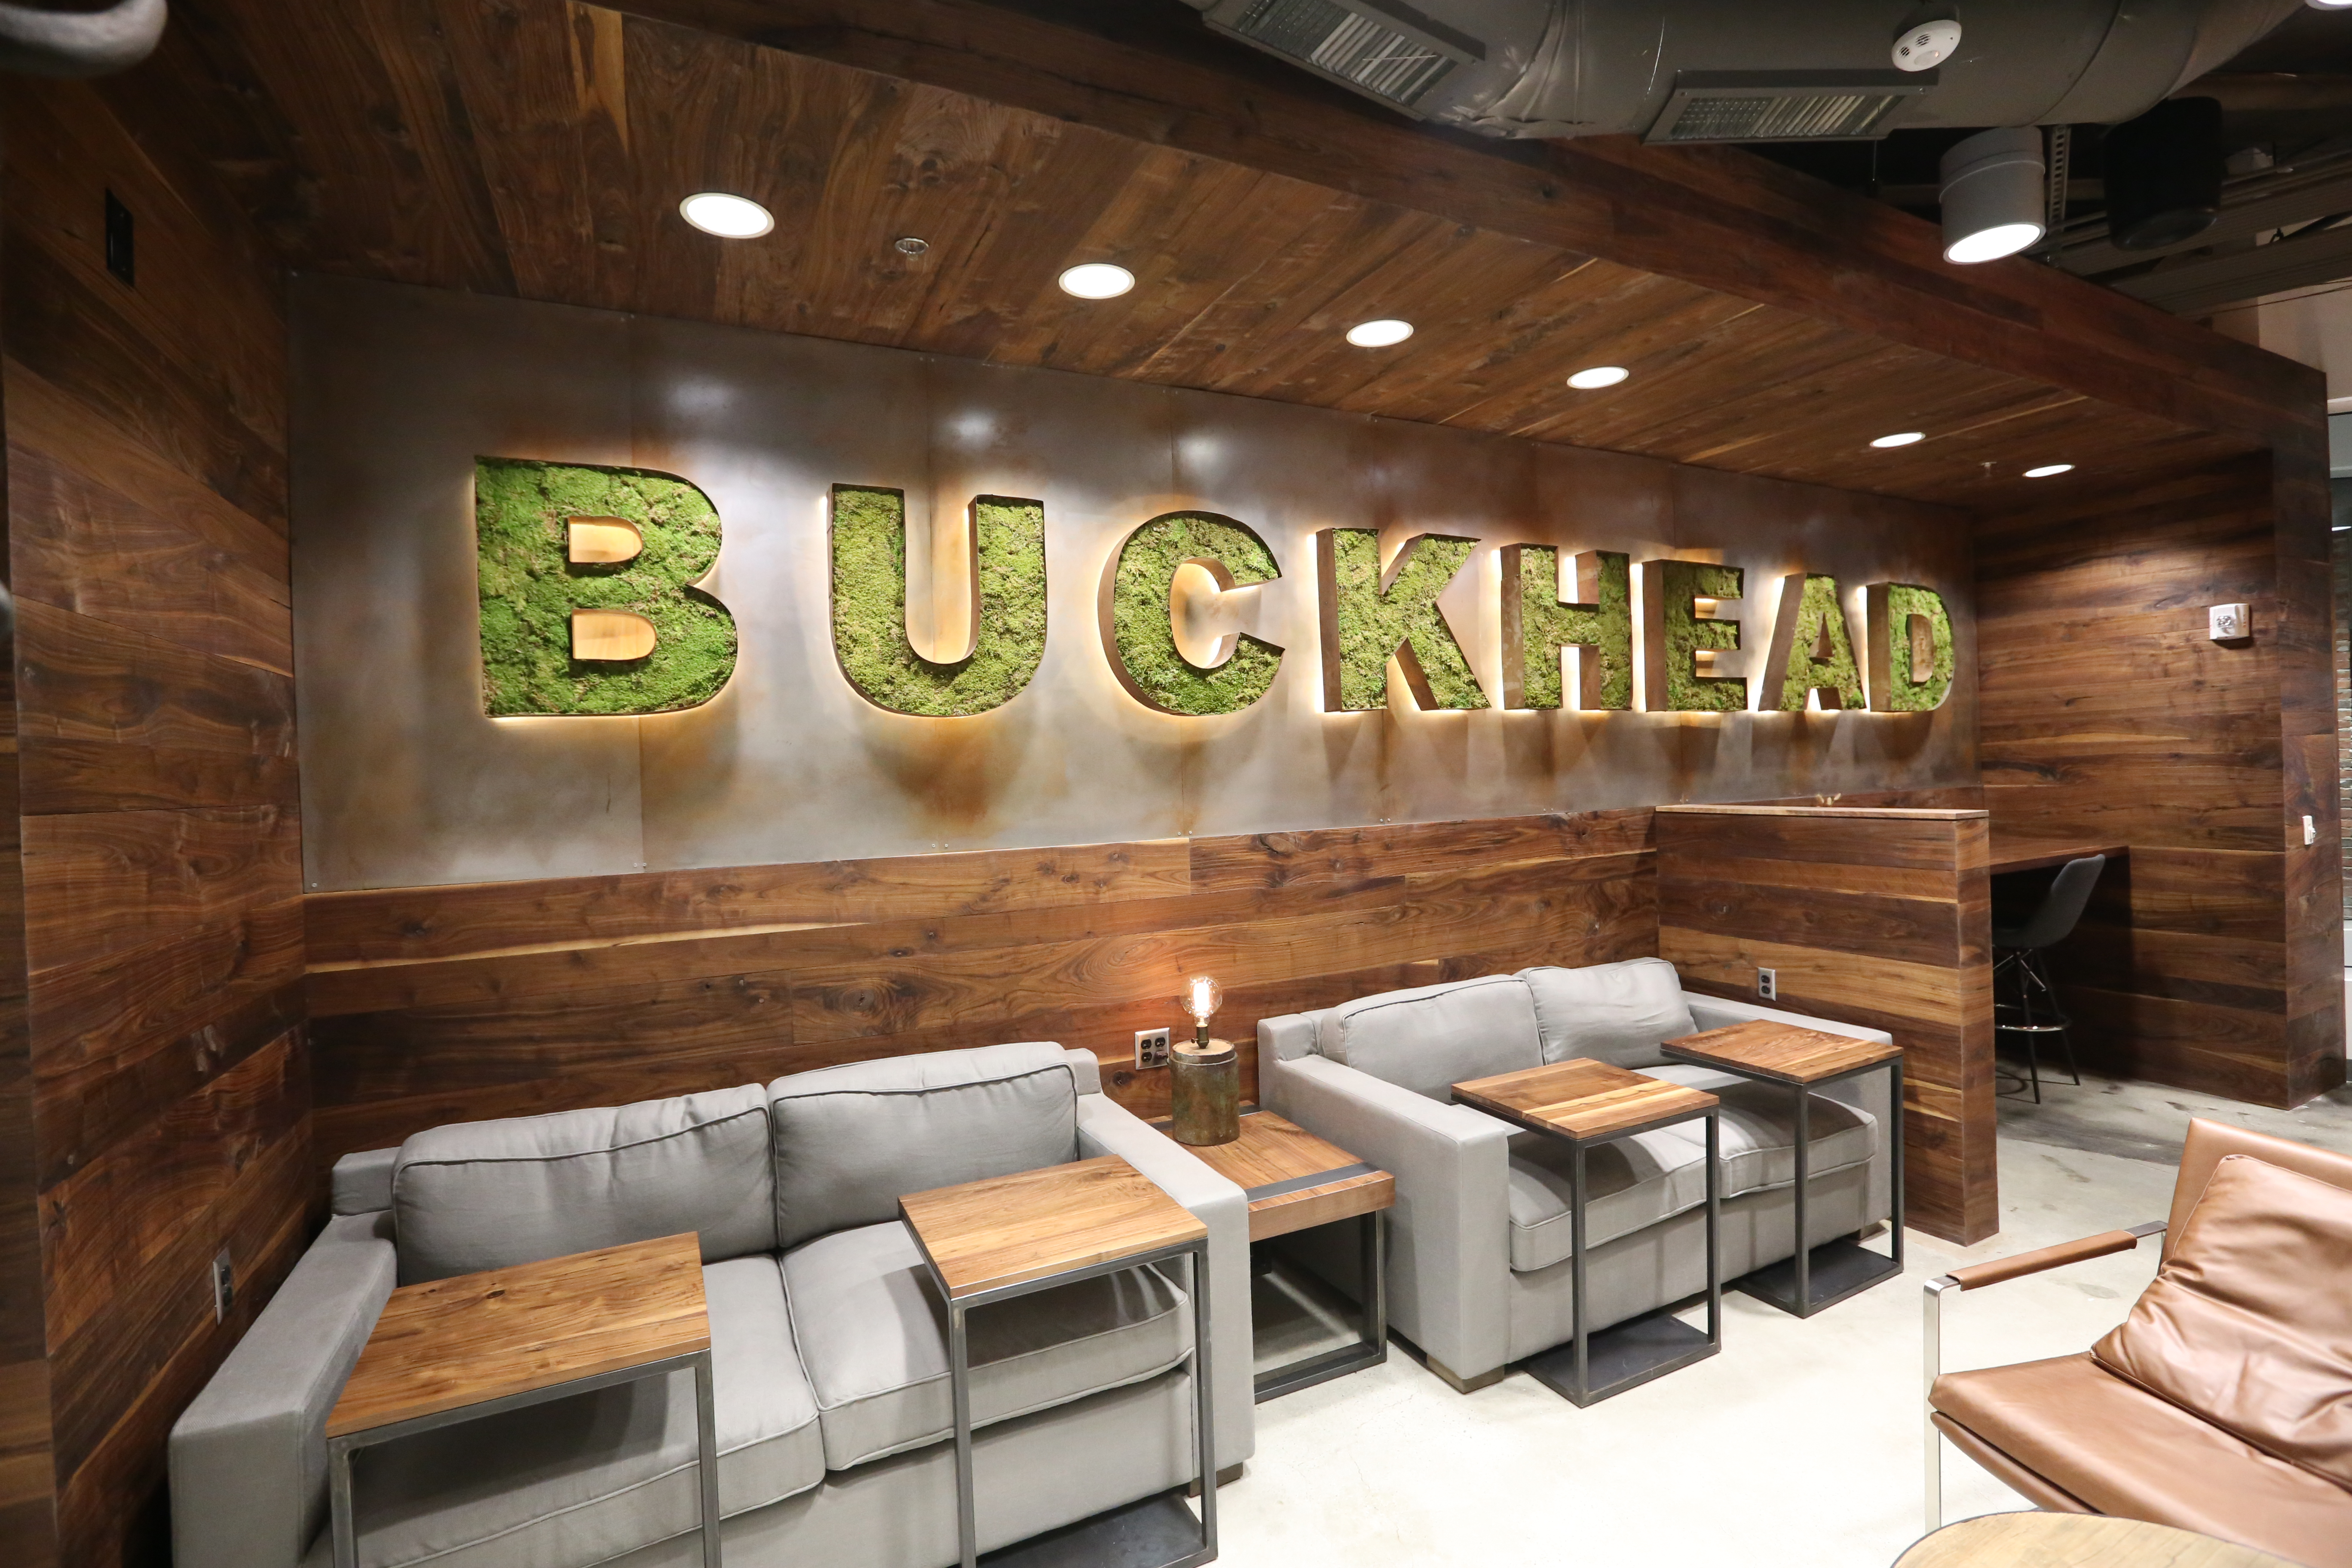 Buckhead coworking space with couches